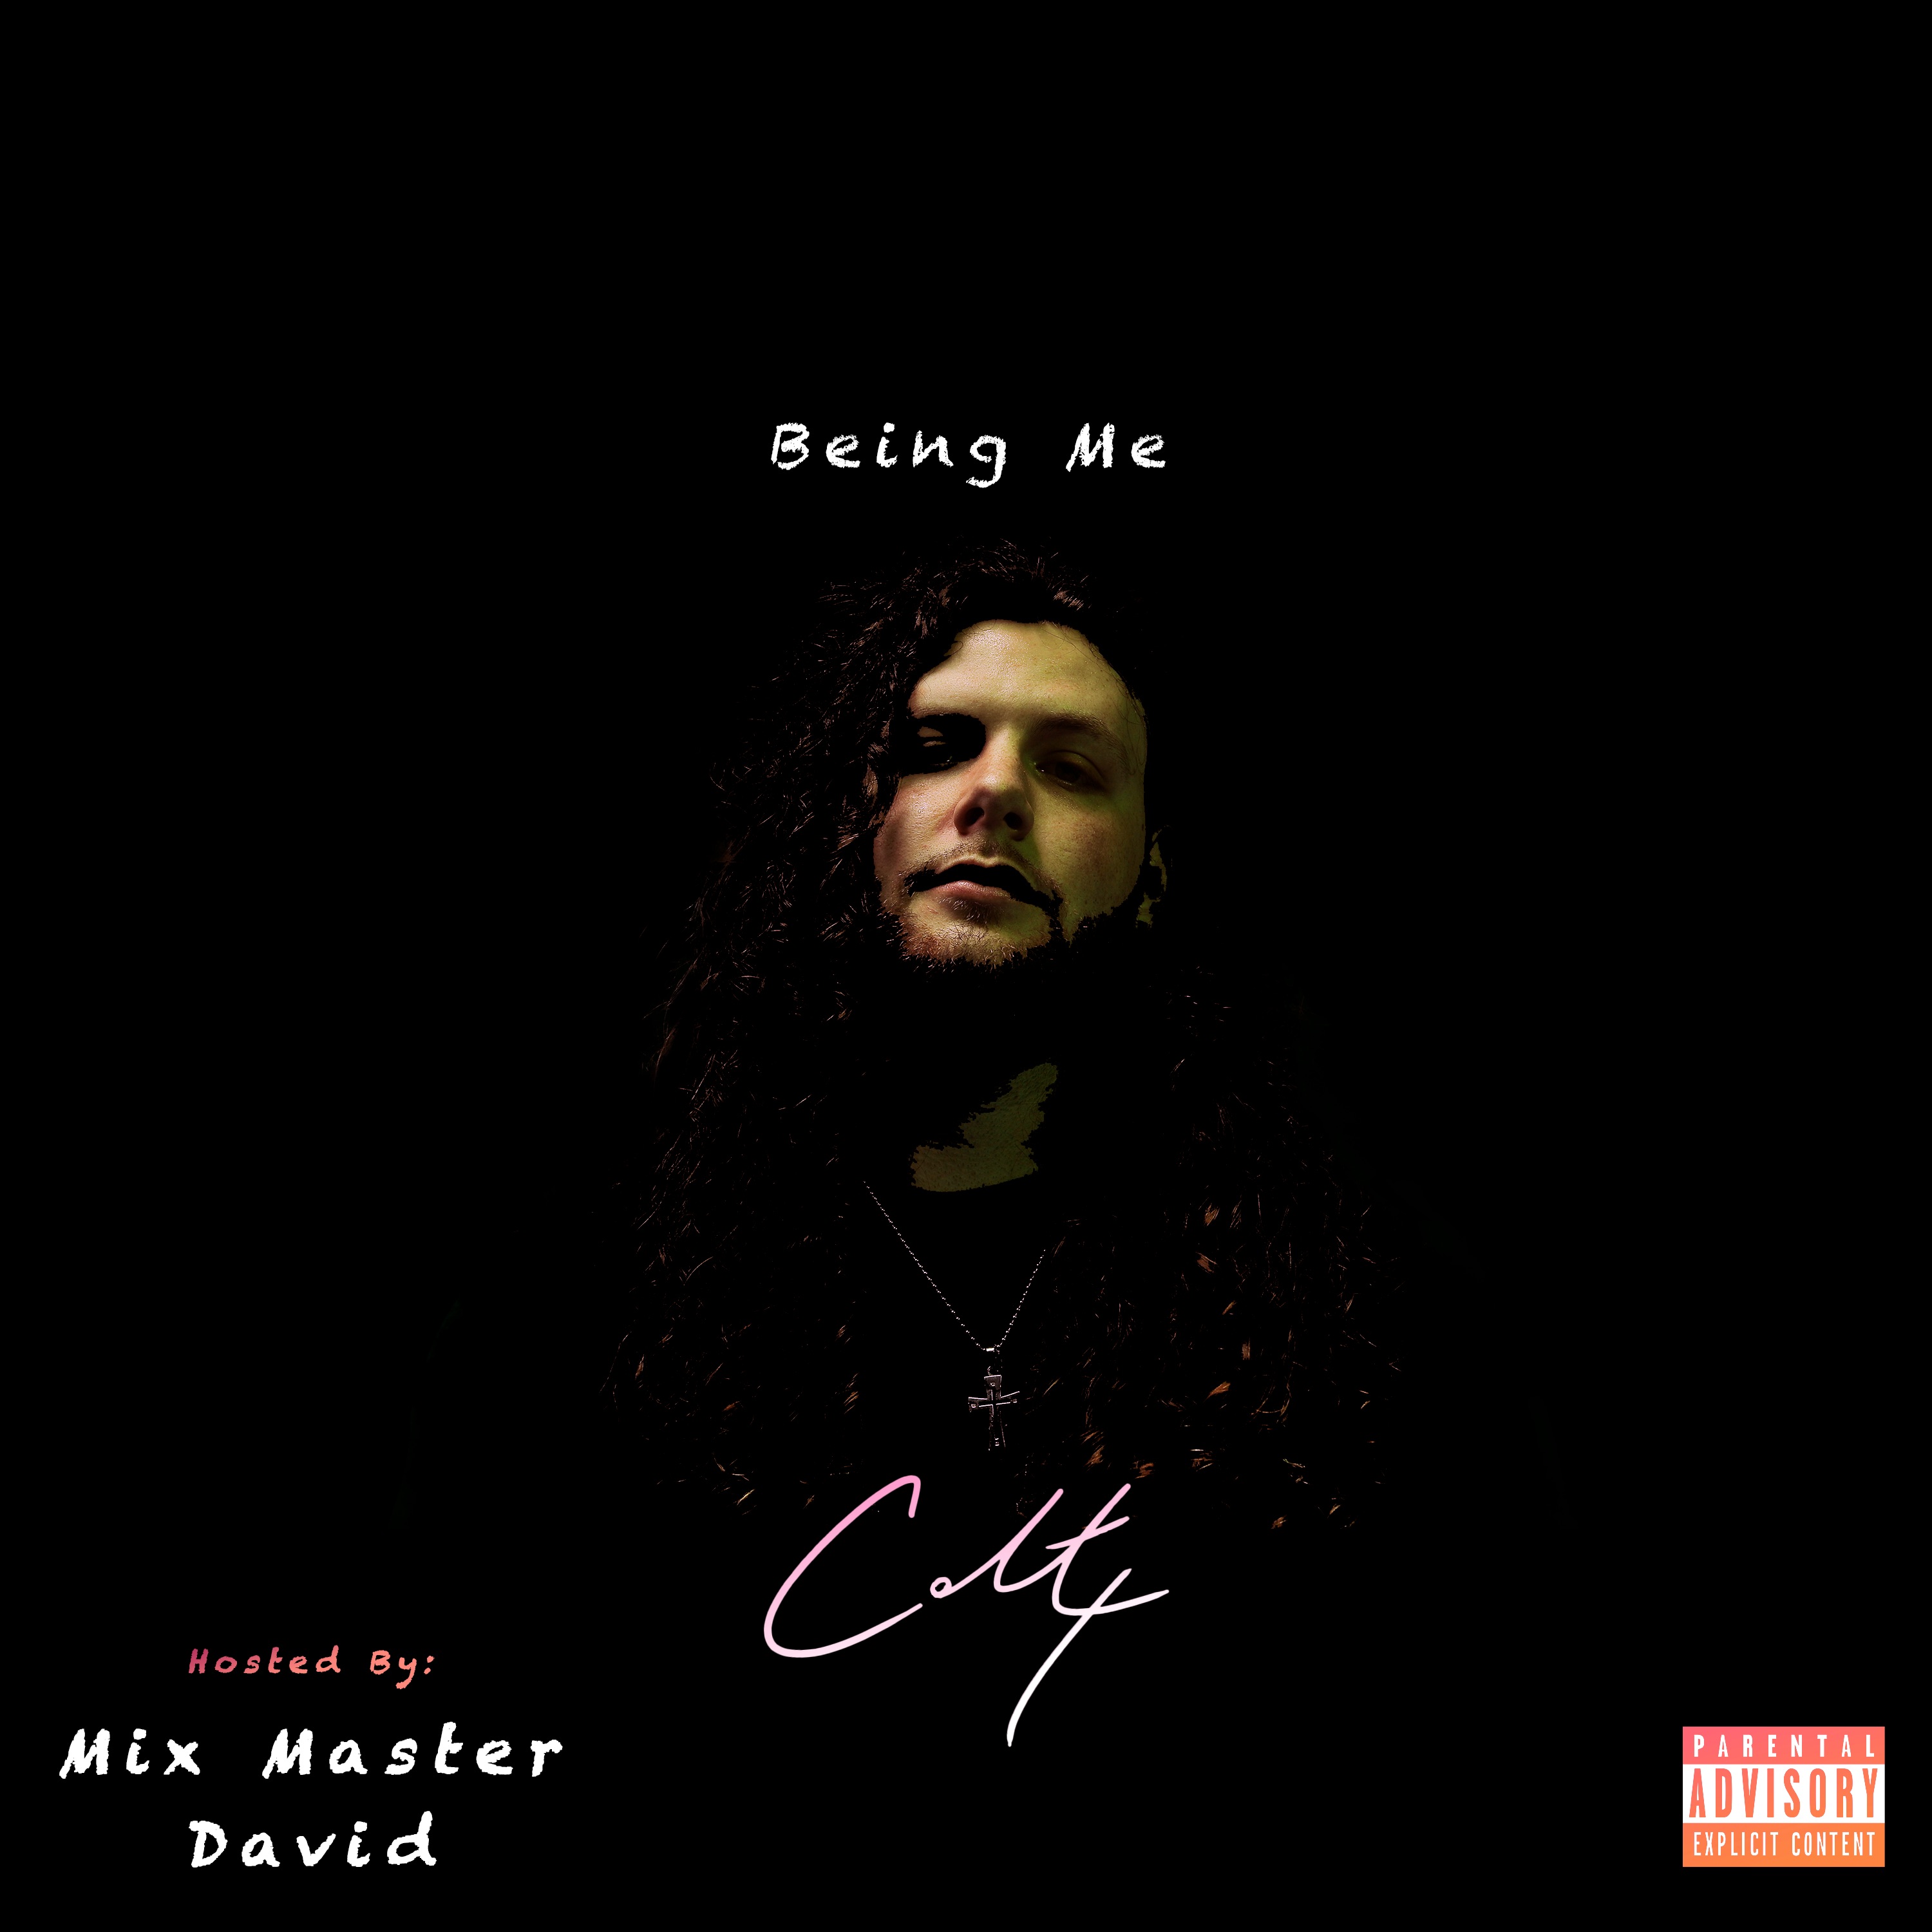 COLTx - Being Me Cover Art